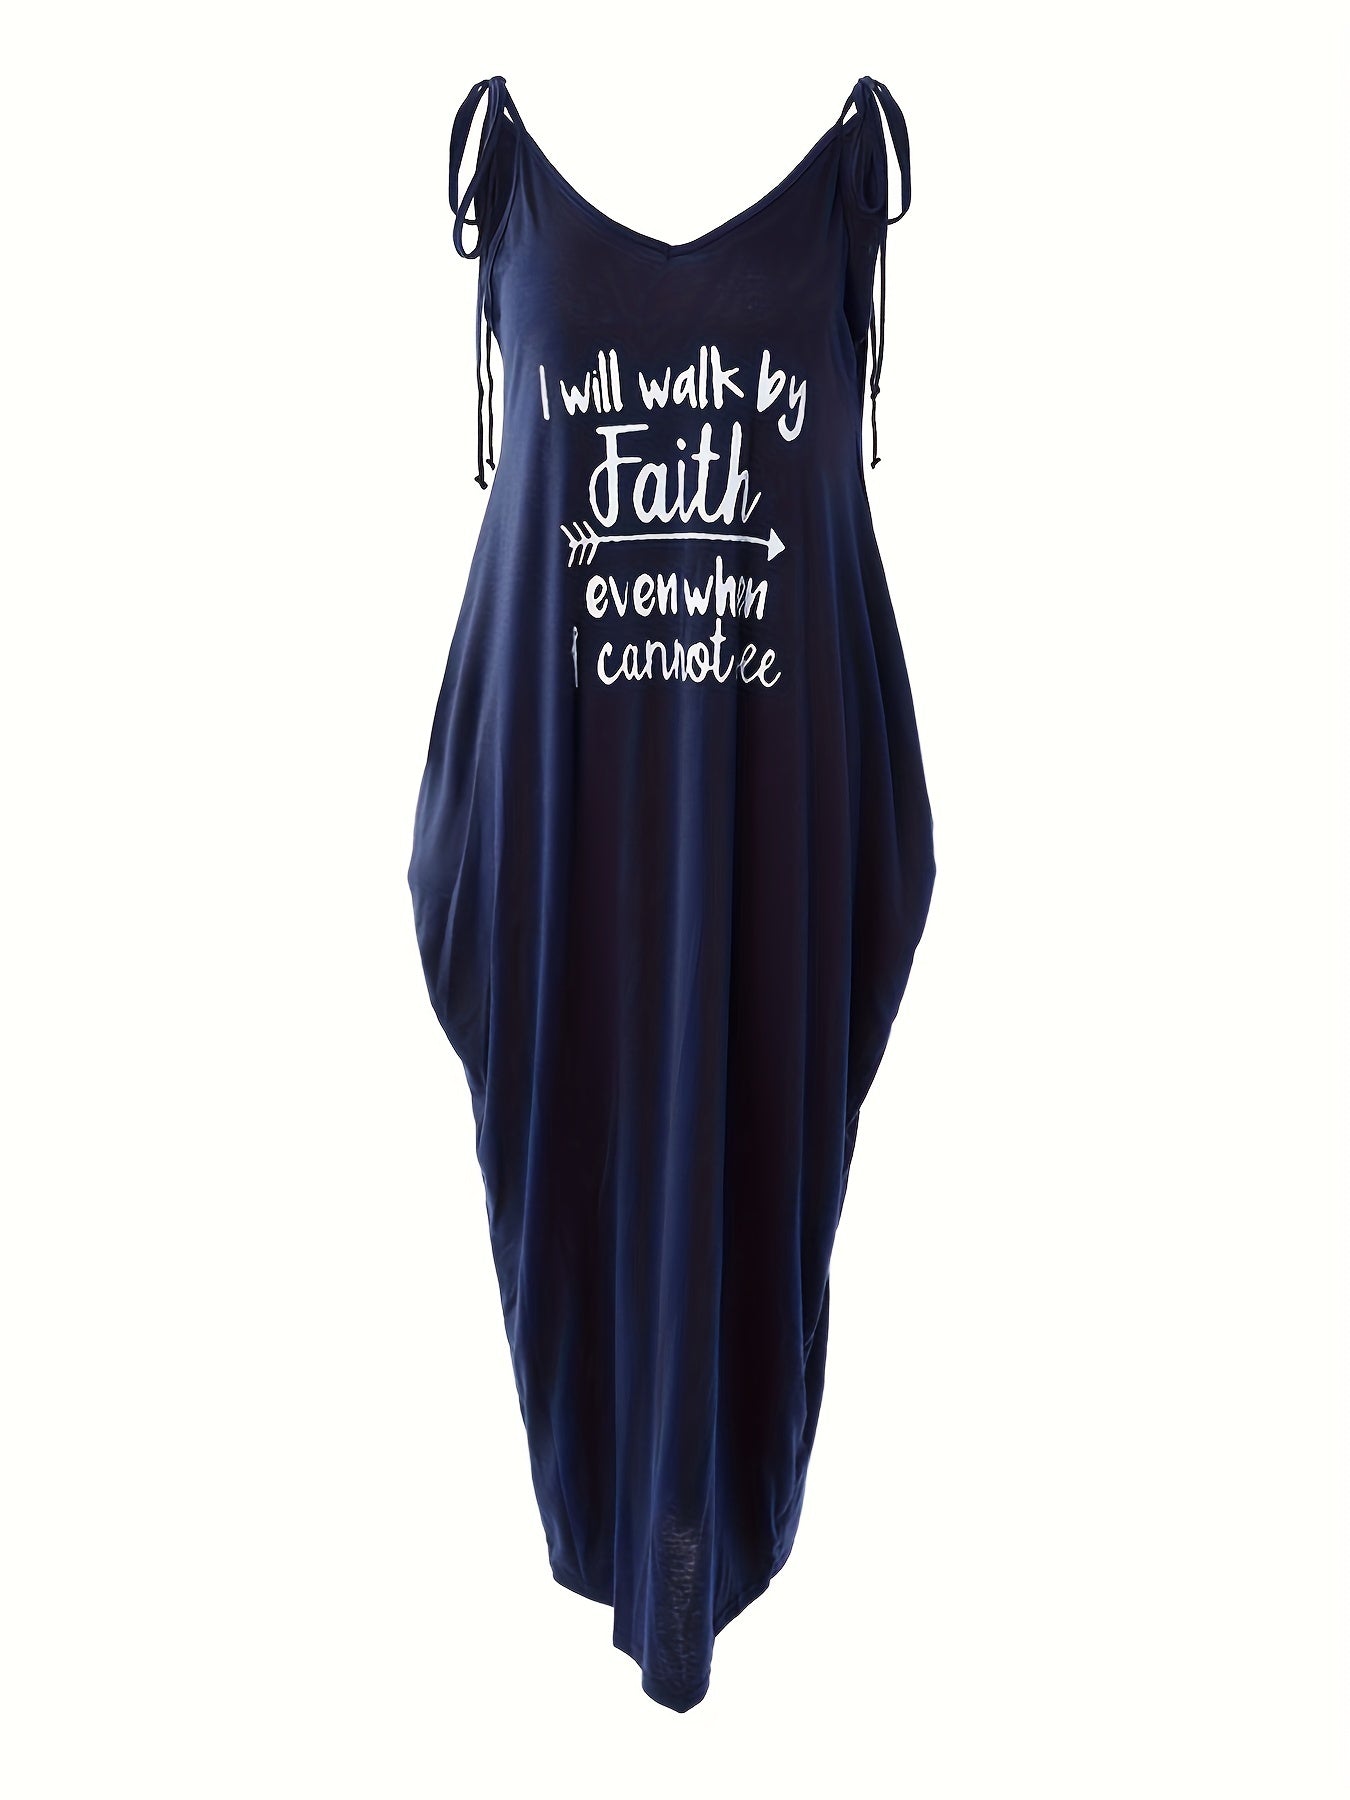 I Will Walk By Faith Even When I Cannot See Women's Christian Casual Dress claimedbygoddesigns